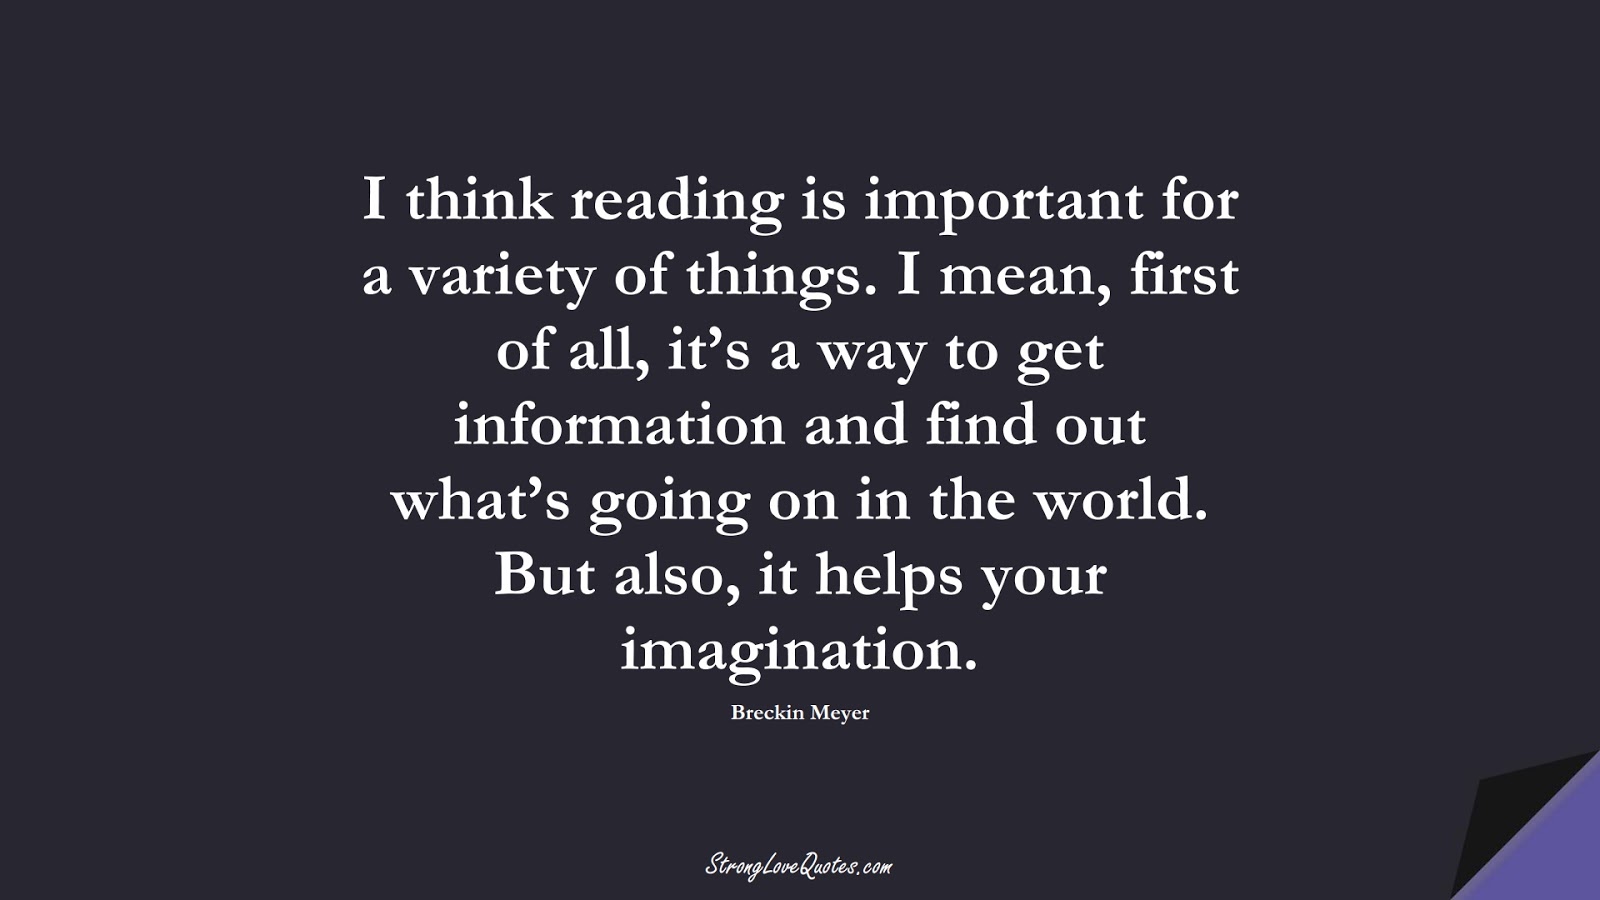 I think reading is important for a variety of things. I mean, first of all, it’s a way to get information and find out what’s going on in the world. But also, it helps your imagination. (Breckin Meyer);  #EducationQuotes